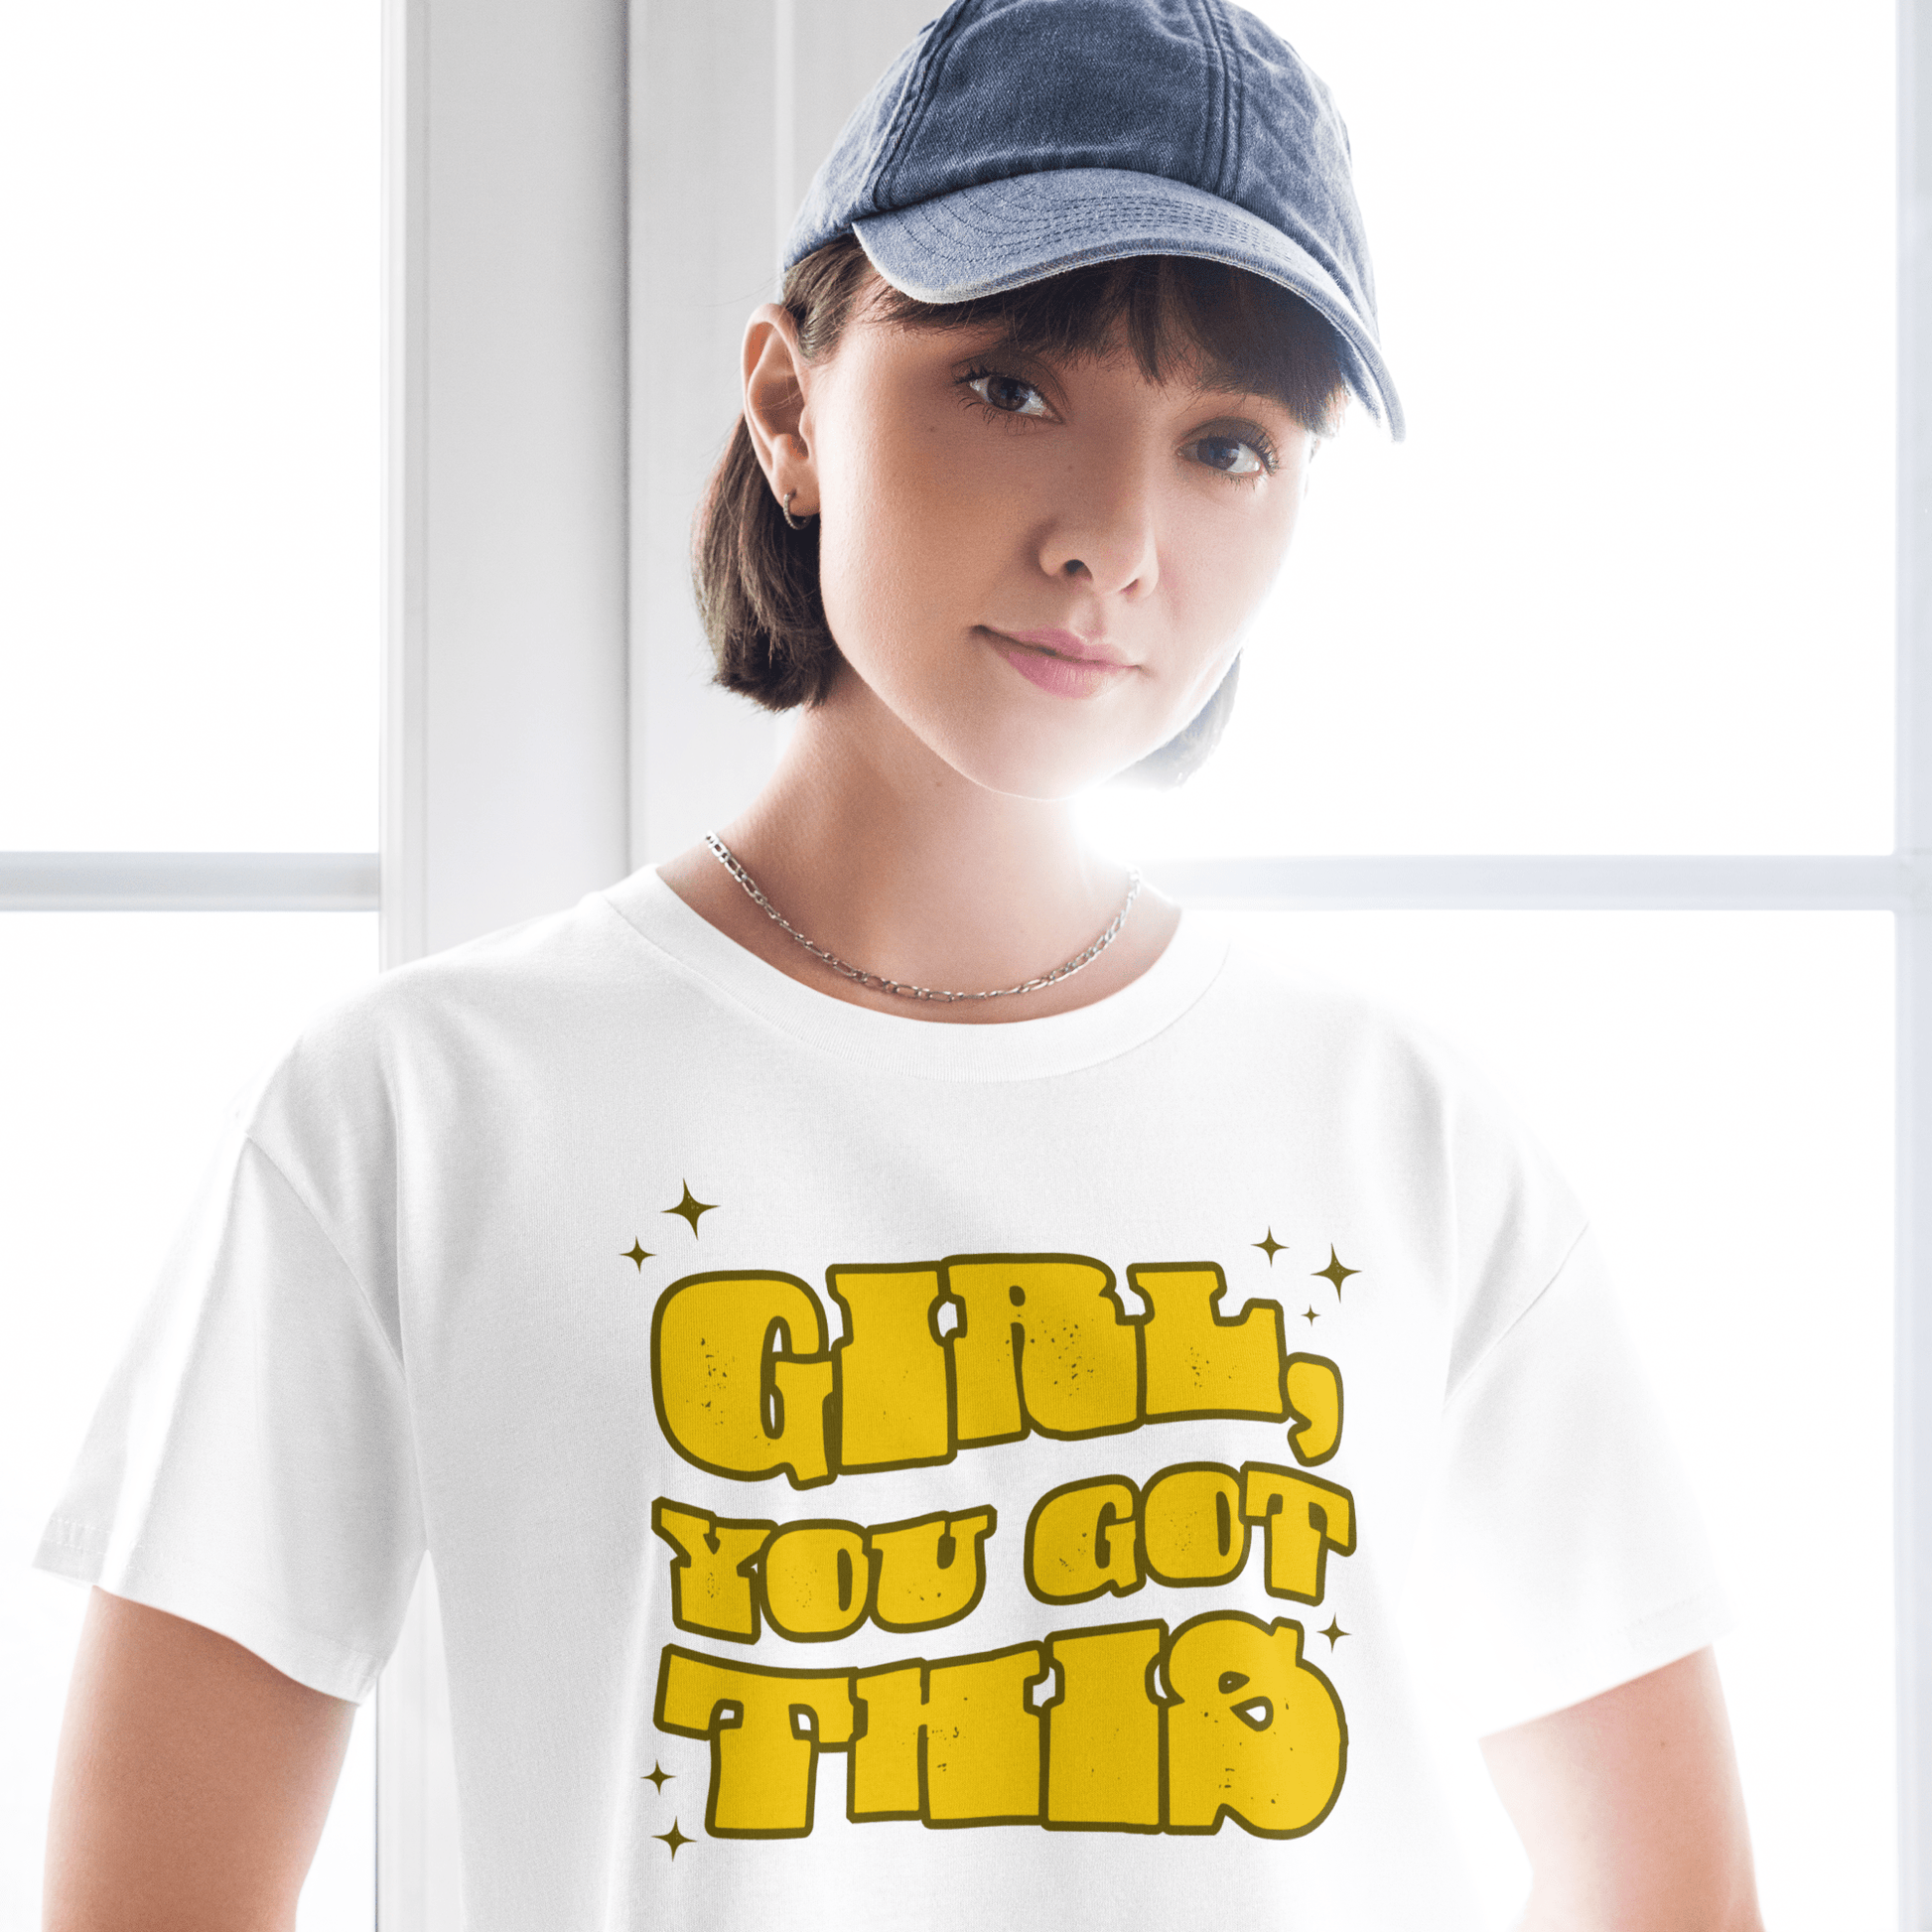 girl-you-ggot-this-womens-crop-top-white-front